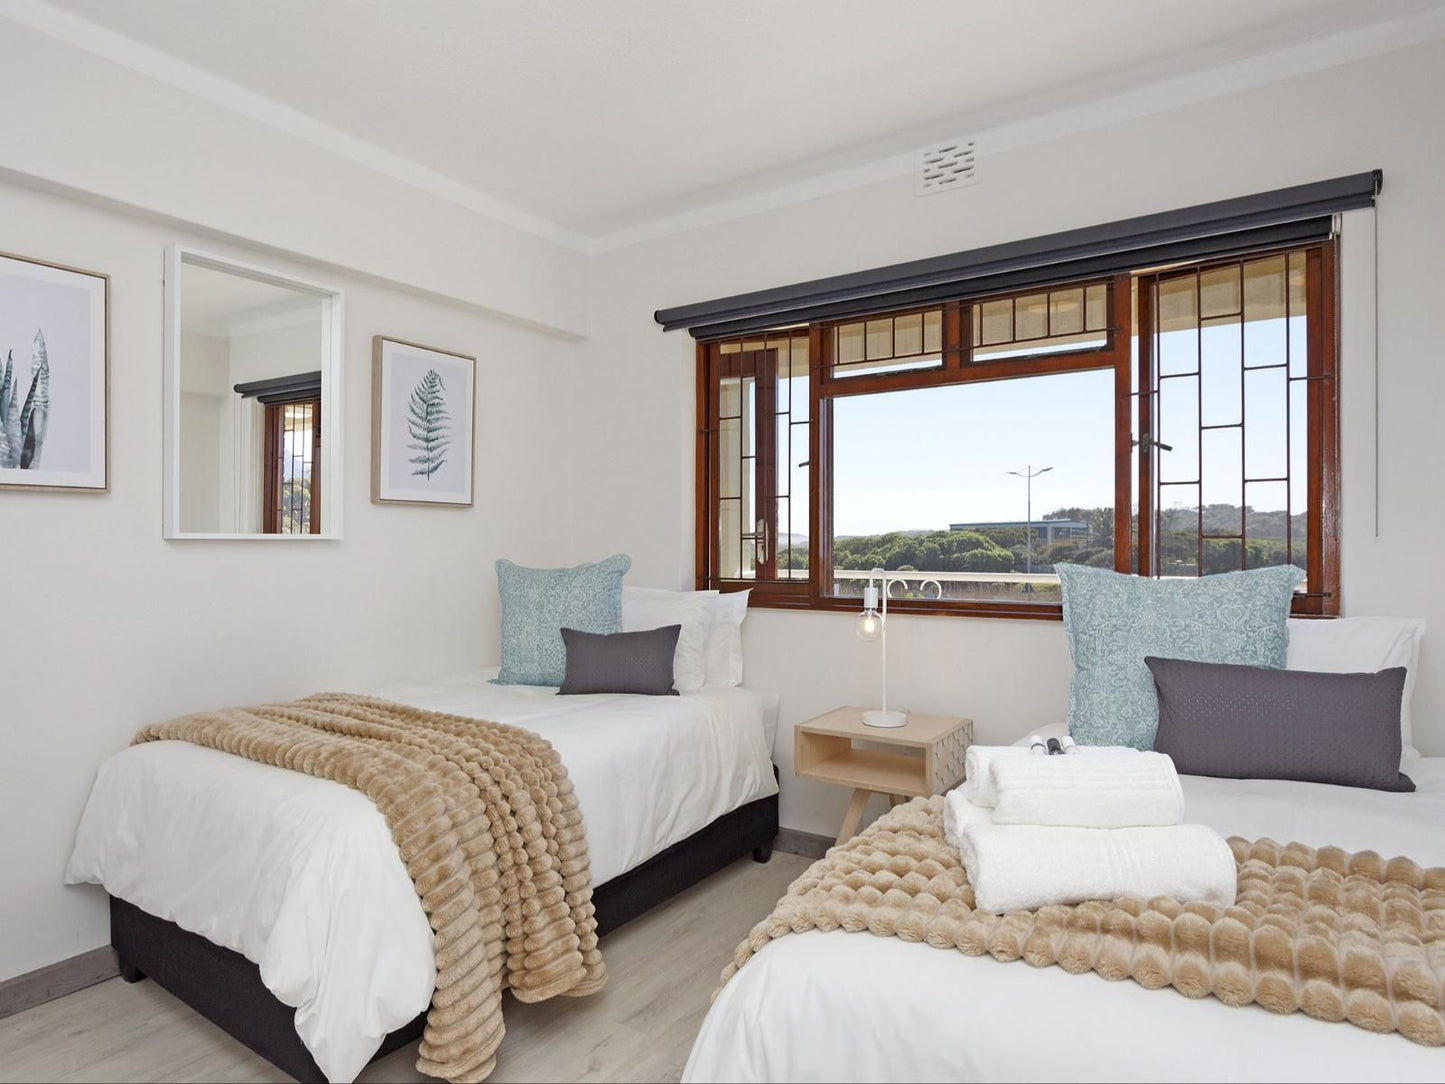 Cisterama 102 By Hostagents Lochnerhof Strand Western Cape South Africa Unsaturated, Bedroom